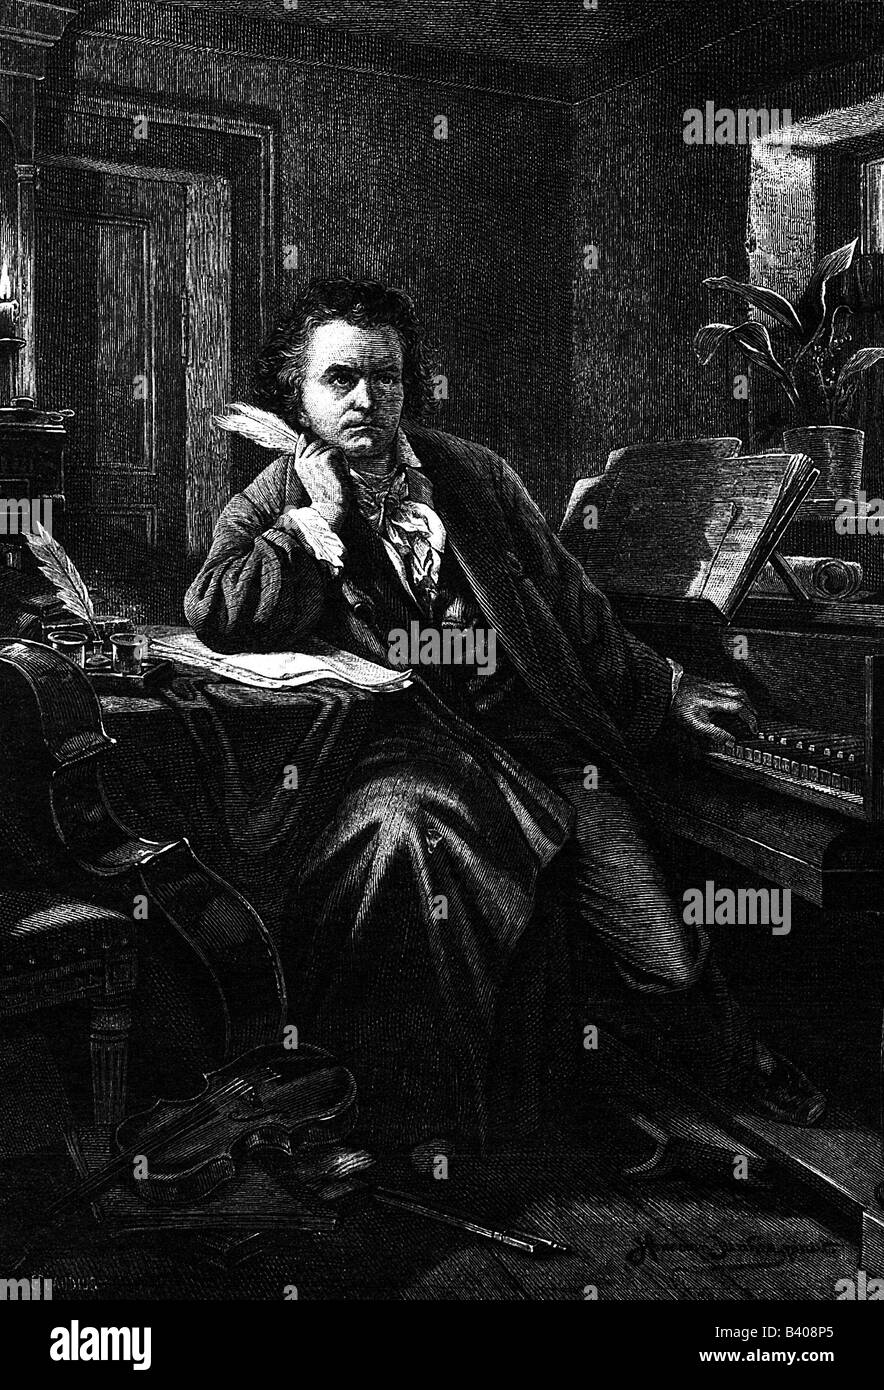 Beethoven, Ludwig van, 17.12.1770 - 26.3.1827, German composer, at work, engraving after painting by Hermann Junker, Artist's Copyright has not to be cleared Stock Photo